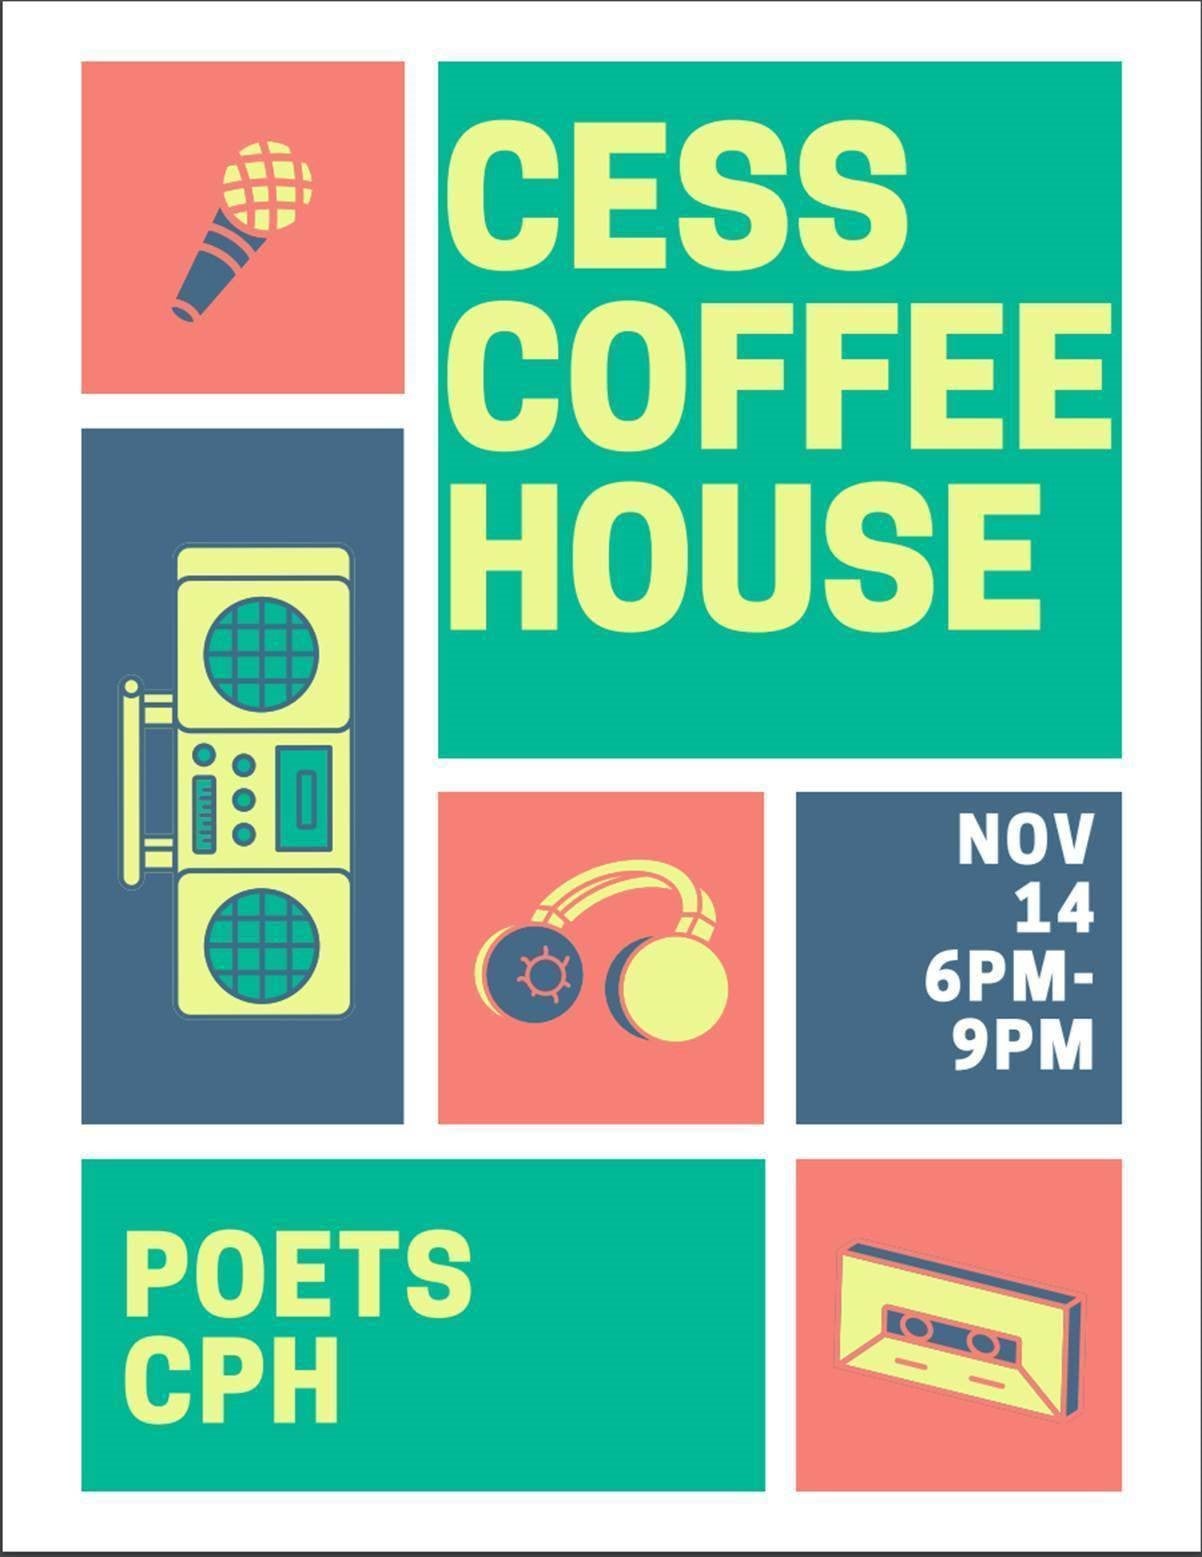 CESS Coffee House event poster.